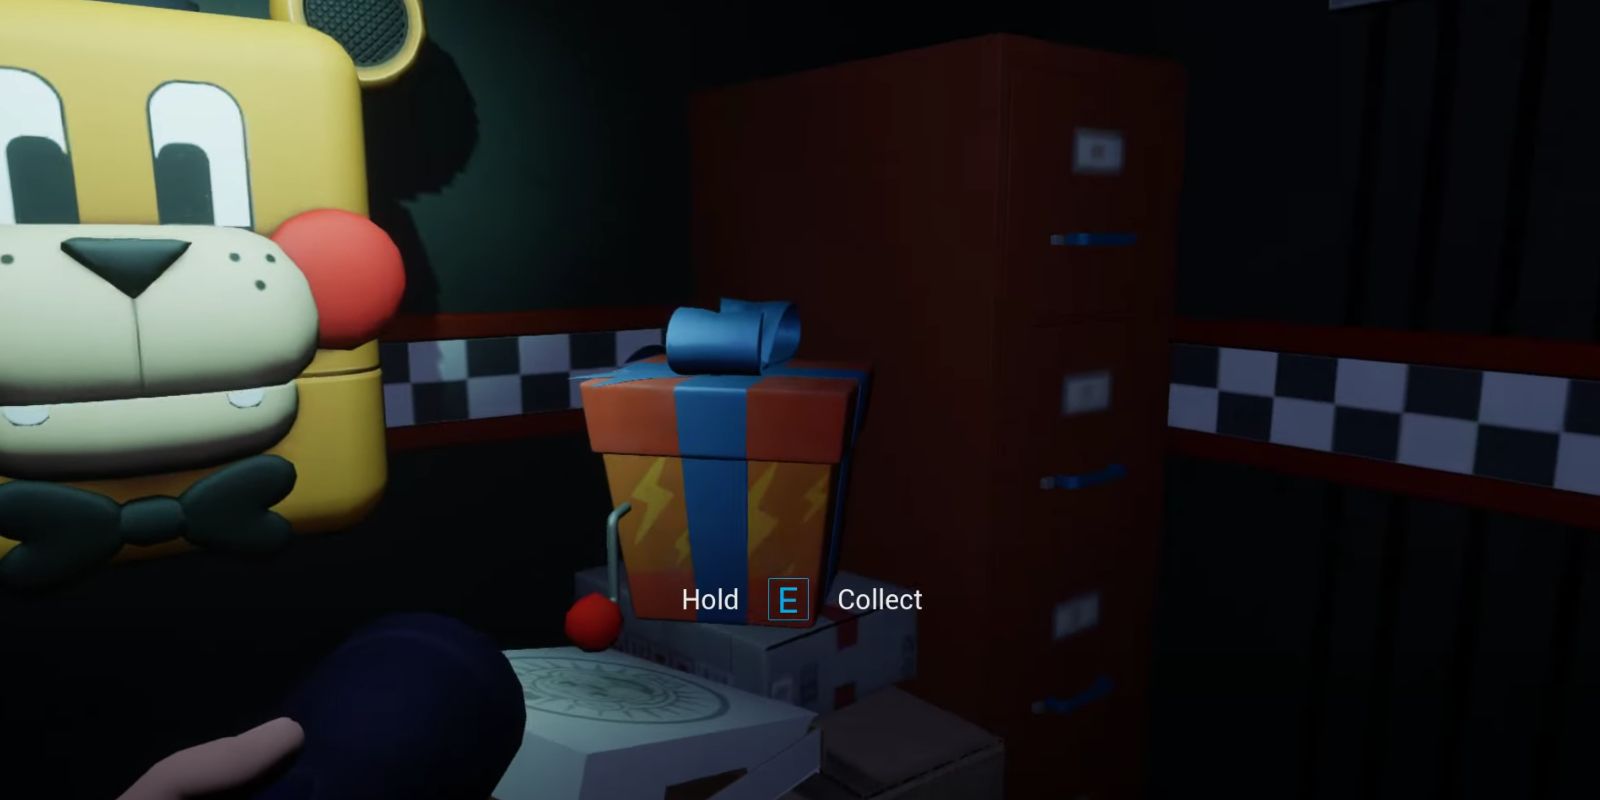 The Bowling Ticket grants Gregory access to Bonnie Bowling in FNAF: Security Breach.